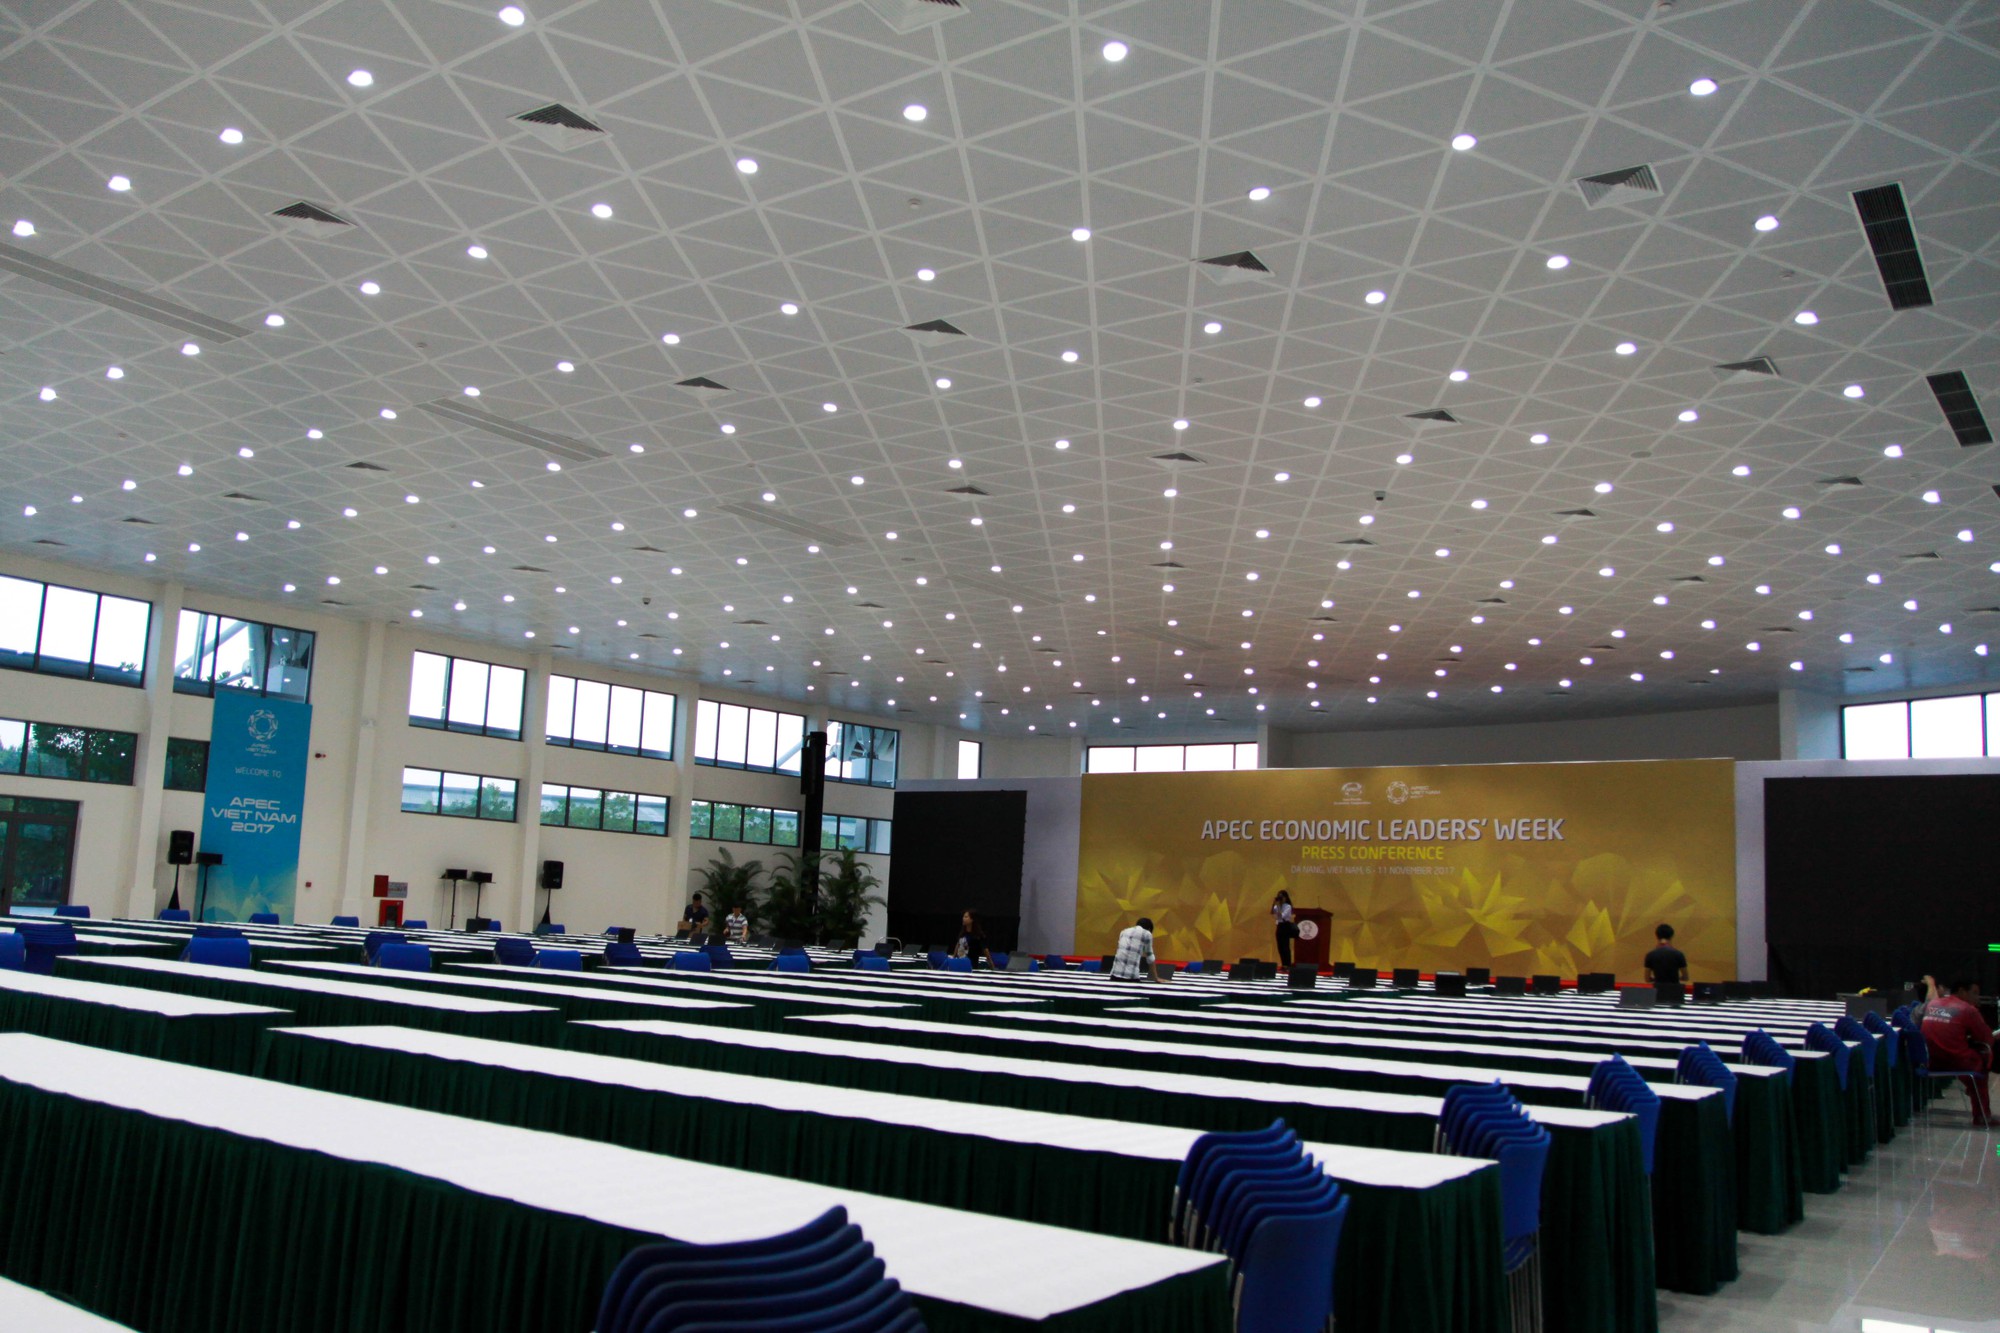 The large conference hall